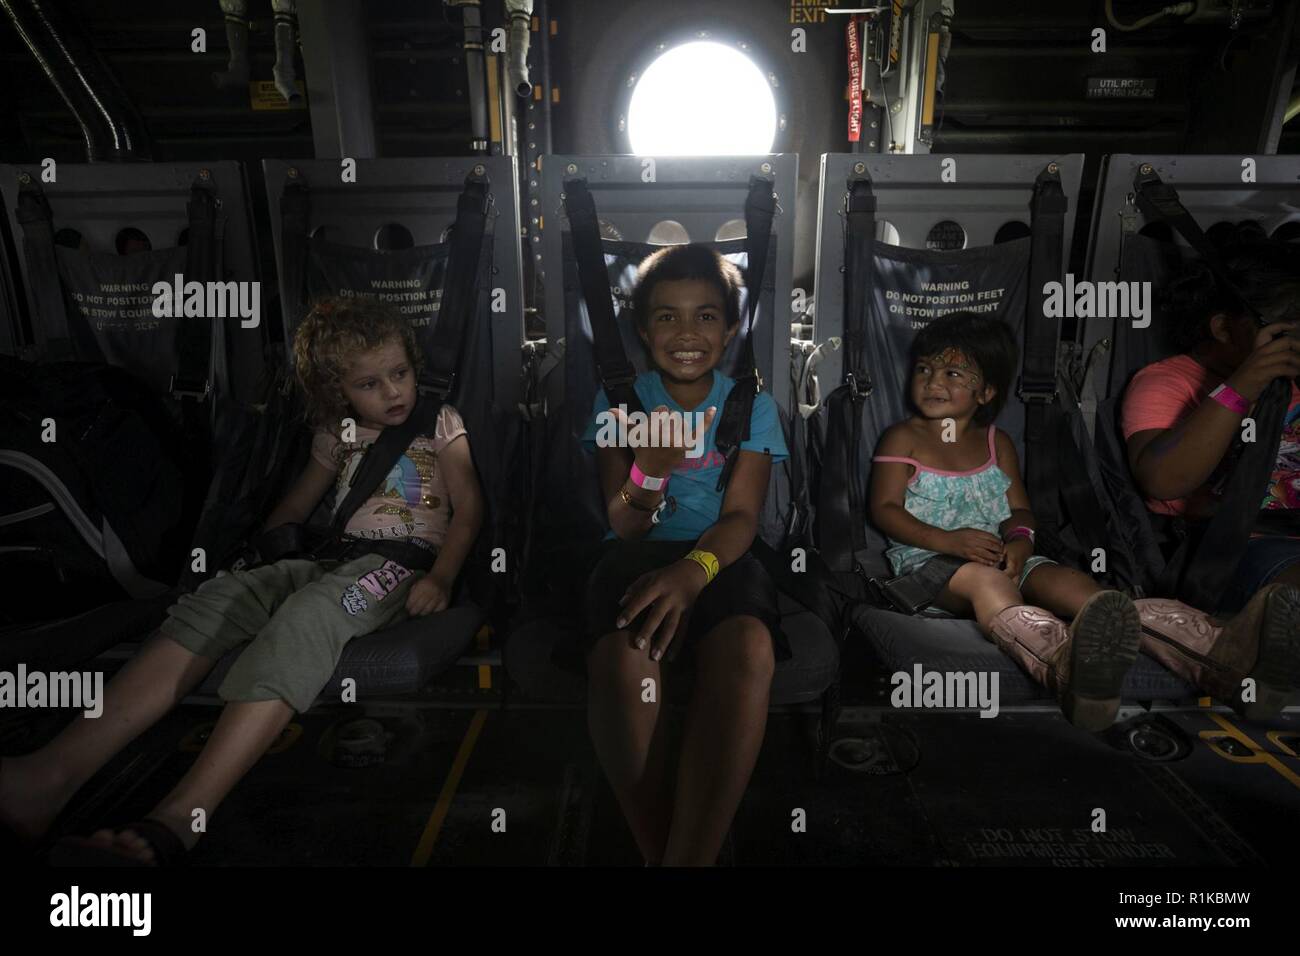 Children sit down and pose for a photo inside a MV-22B Osprey aircraft during the Waimea Fall Festival at the Waimea District Park, Oct. 13, 2018. U.S. Marines with Marine Medium Tiltrotor Squadron (VMM) 363, nicknamed the Lucky Red Lions, flew one of their aircraft from Marine Corps Base Hawaii on Oahu to the Waimea Fall Festival, providing a static display and subject matter experts for a first-hand experience to the festival’s attendants. The squadron arrived to Hawaii earlier this year increasing the combat capability and crisis response within the Indo-Pacific region. Stock Photo